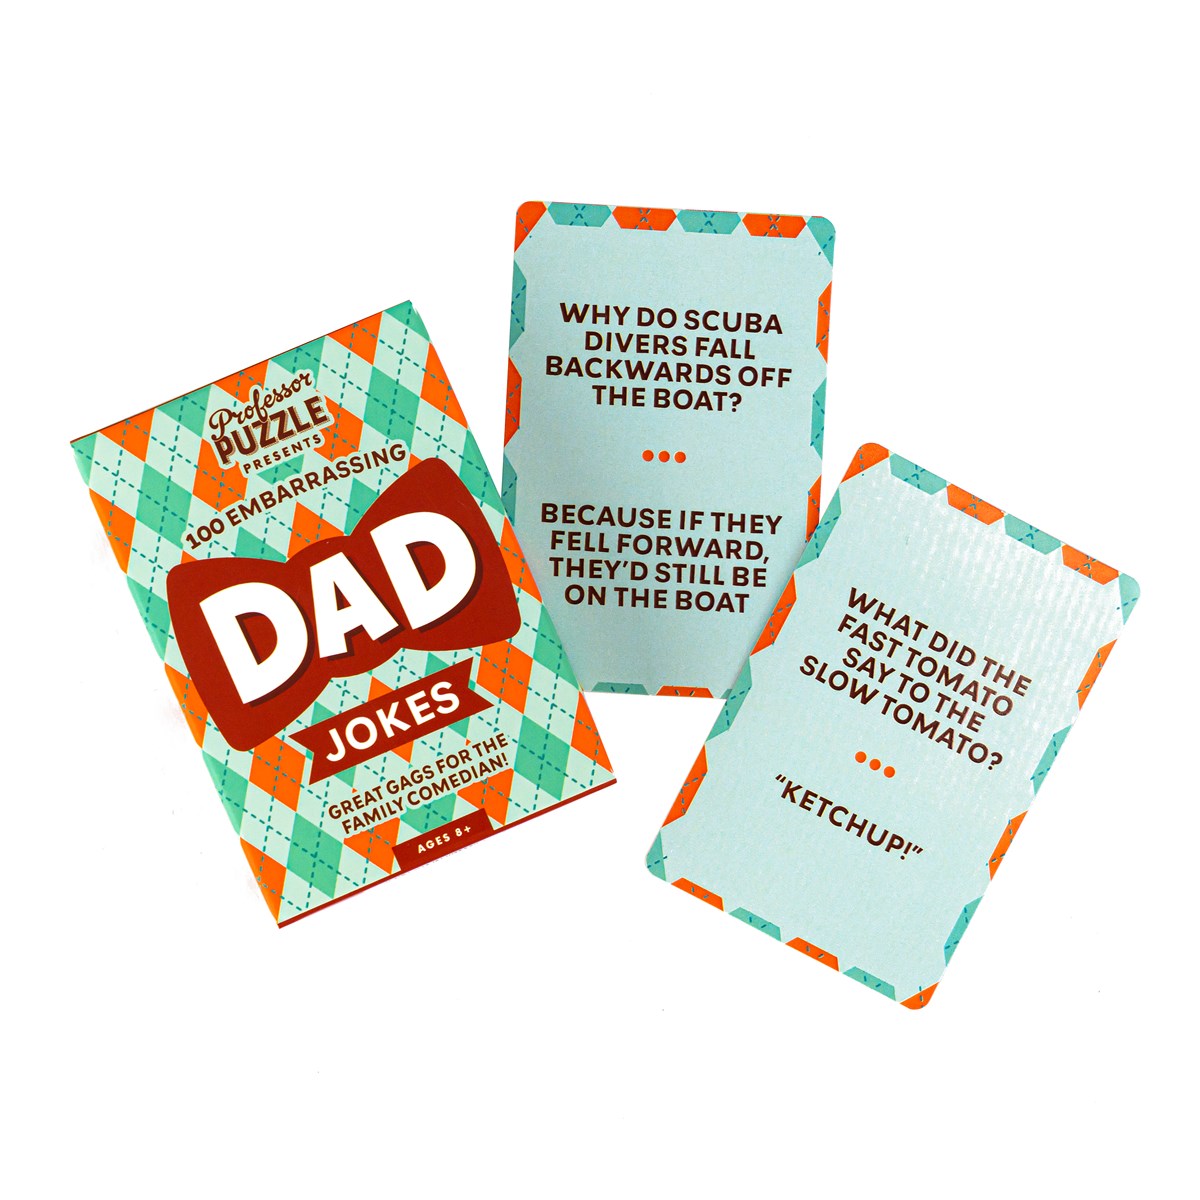 100 Most Embarrassing Dad Jokes Card Pack